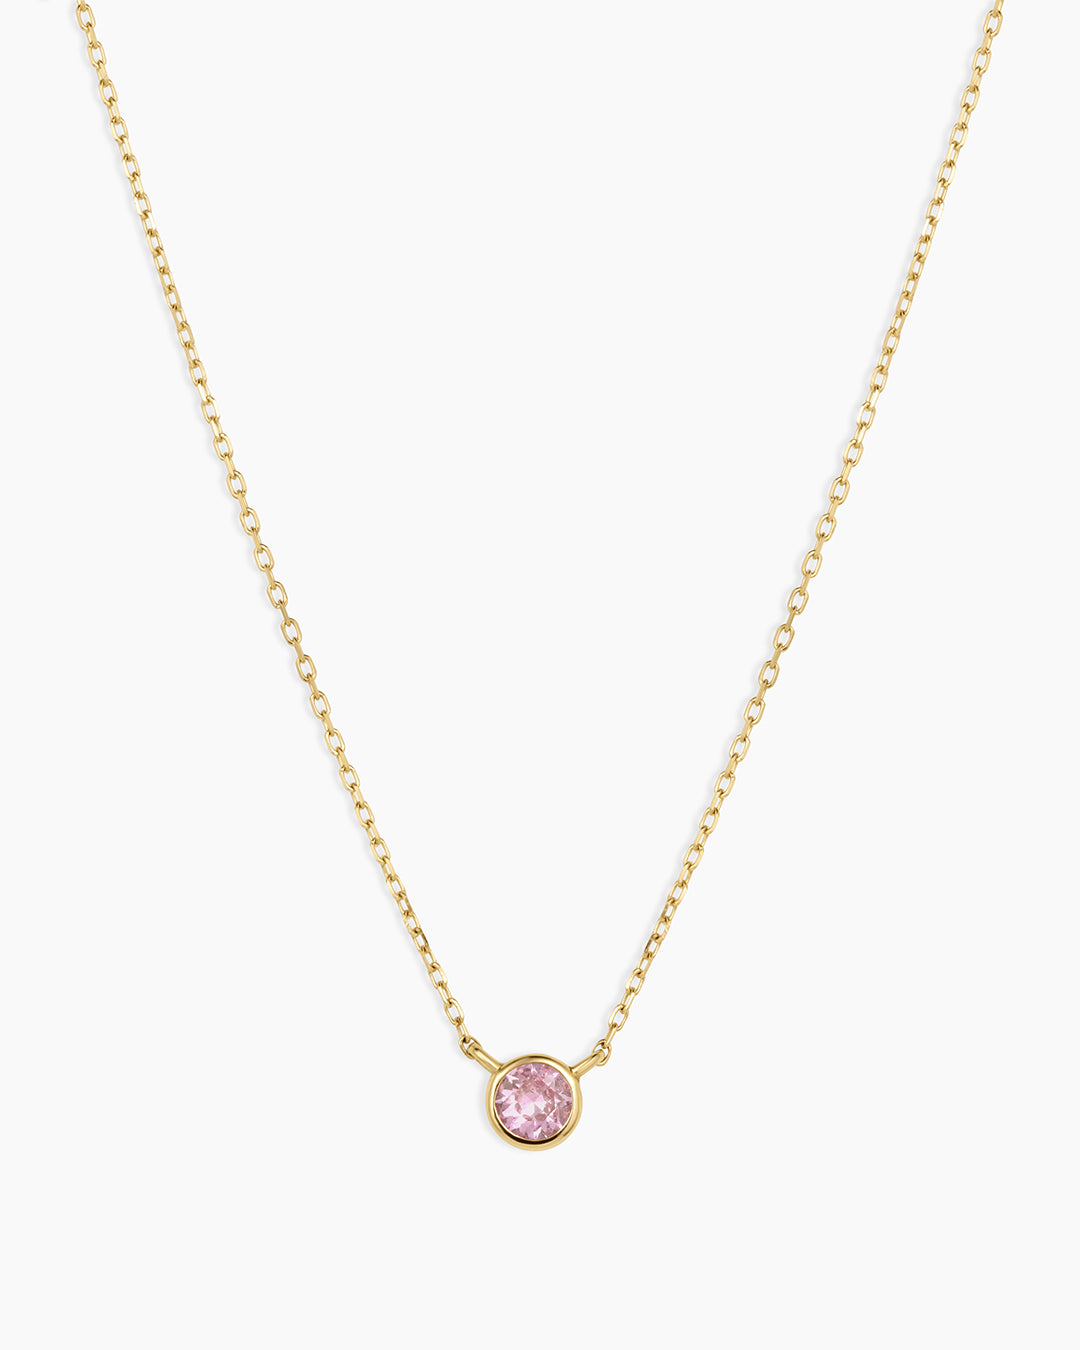 Gold Ball Pendant in Yellow, Rose or White Gold